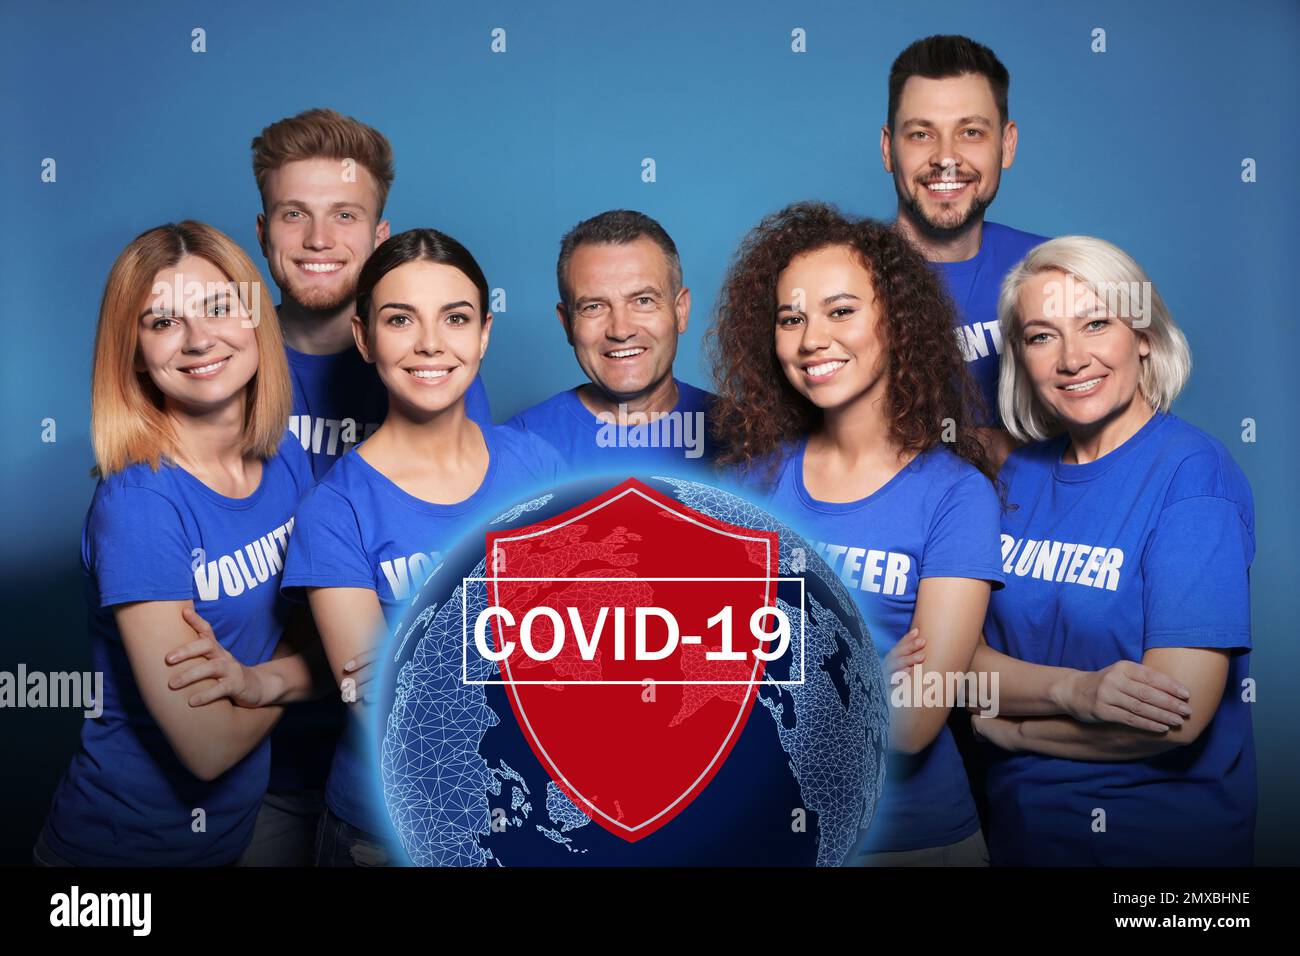 Volunteers uniting to help during COVID-19 outbreak. Group of people on blue background, world globe and shield illustrations Stock Photo